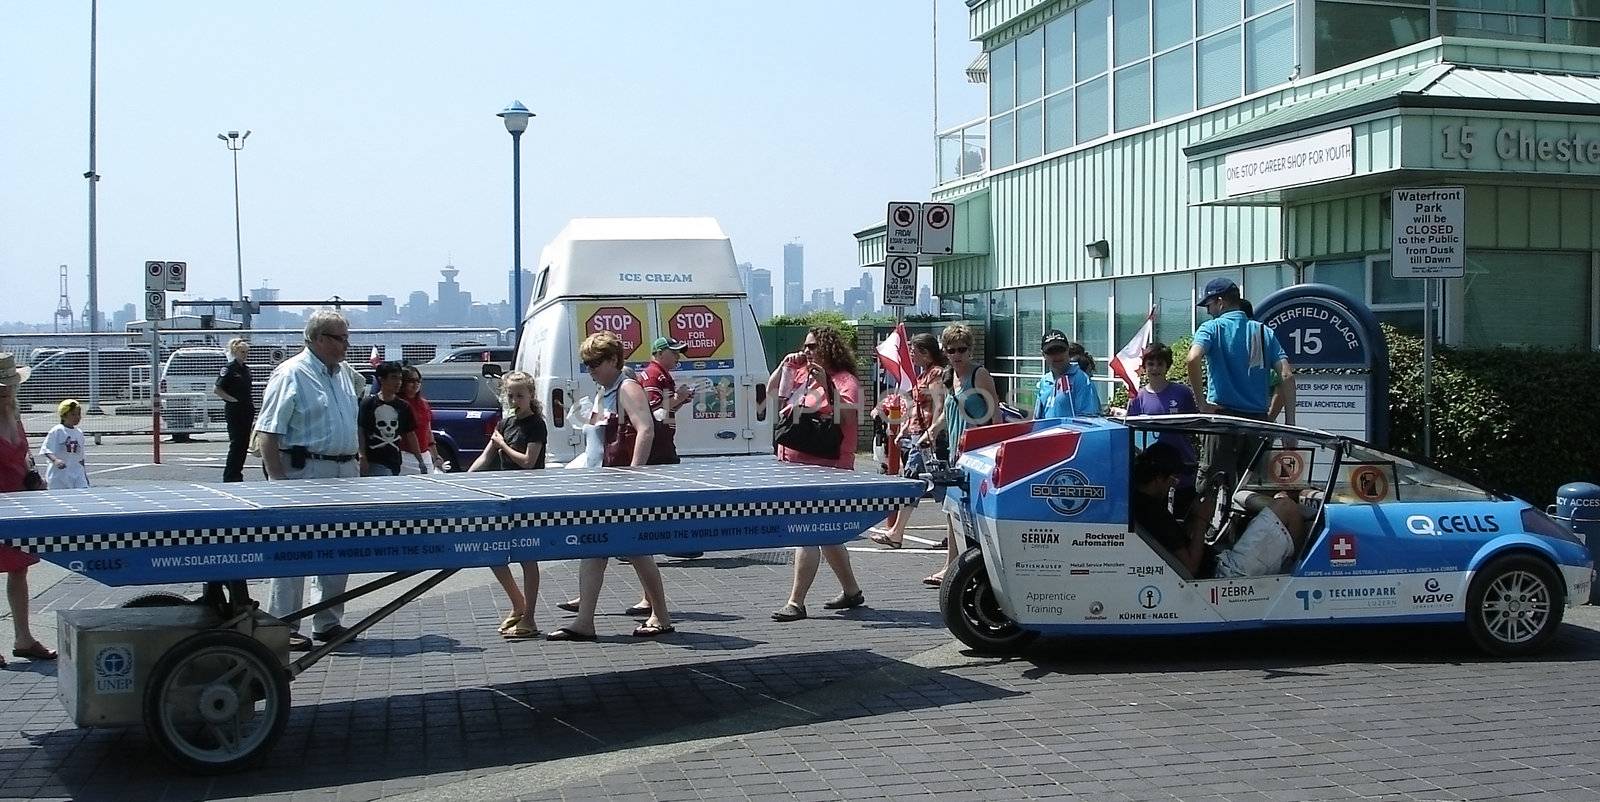 First world tour of a vehicle powered only by solar energy. Set off on 1 July 2007 in Switzerland. After one year on July 1st, Canada Day, the ecological car roams the streets of North Vancouver.